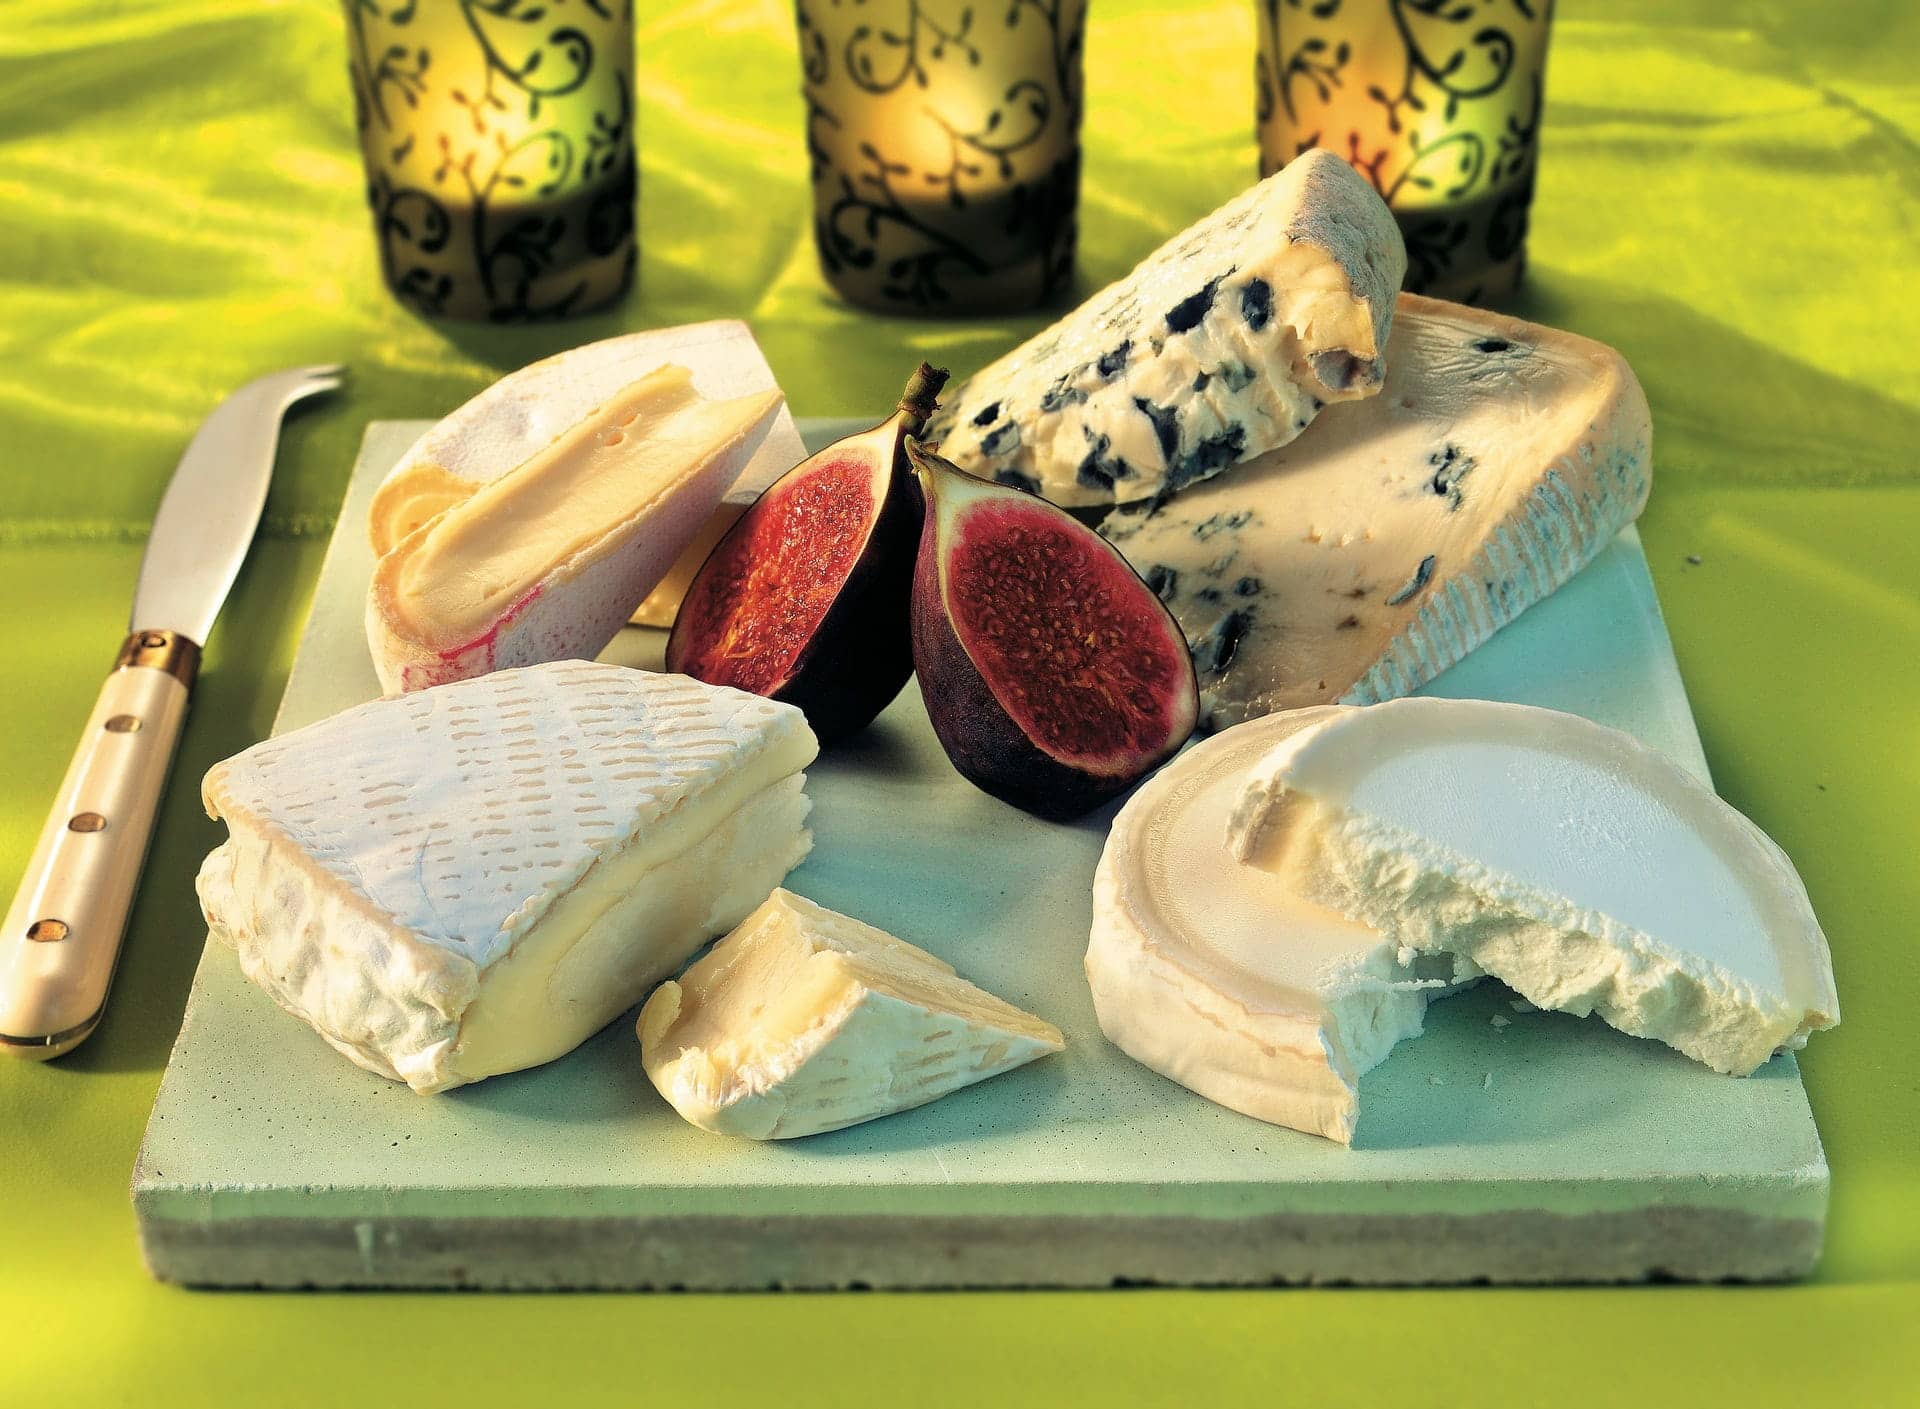 different types of cheese with figs on a cutting board